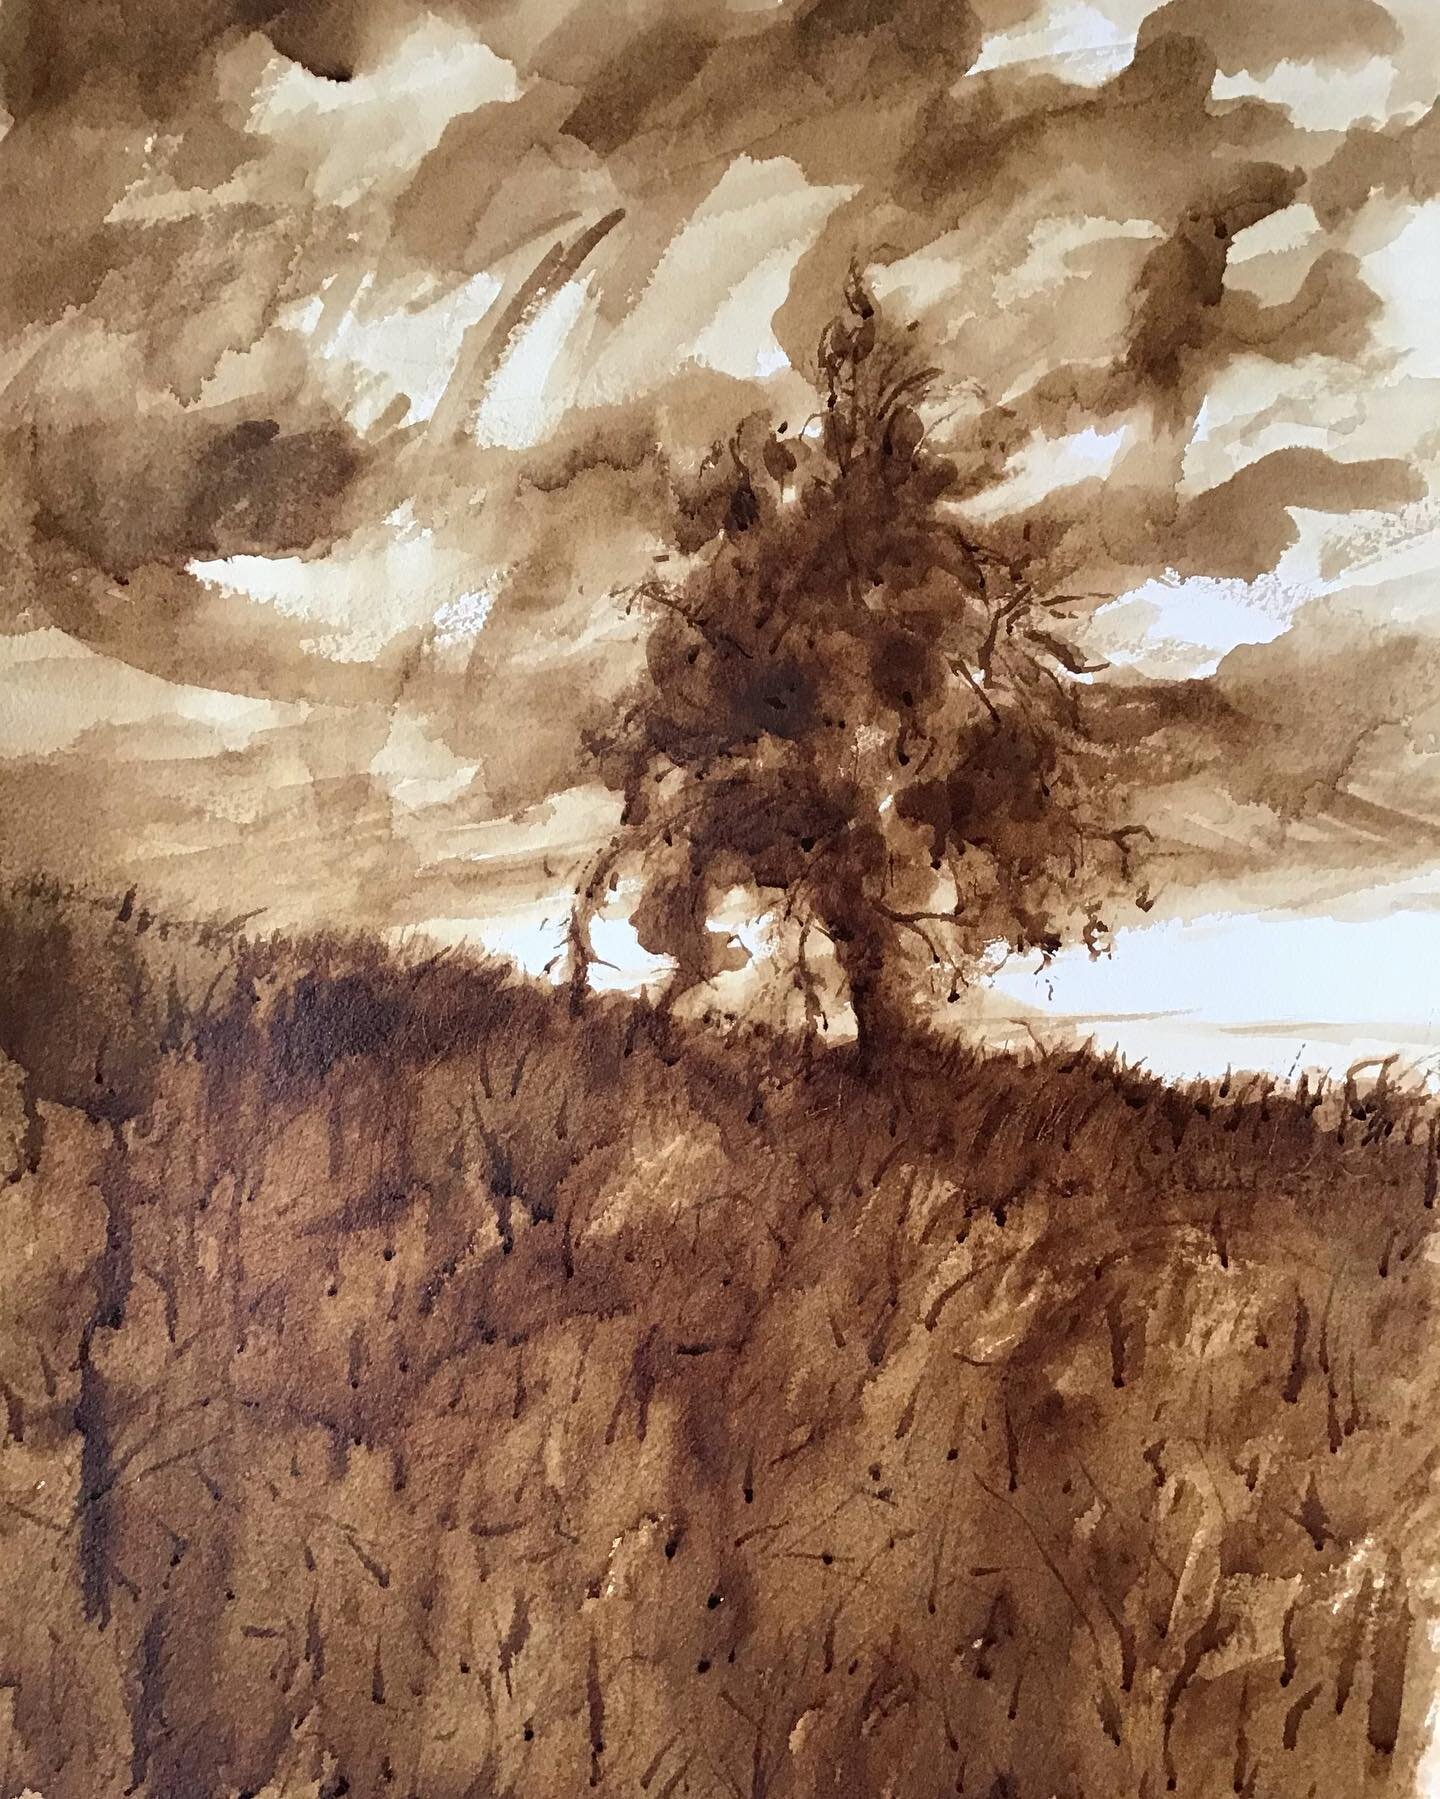 1) &lsquo;Storm Tree&rsquo; French sepia ink 74 x 89 cm (framed) 2) &lsquo;Flowing&rsquo; French sepia ink 74 x 94 cm (framed) 3) &lsquo;Reeds&rsquo; French sepia ink 74 x 91 cm (framed)